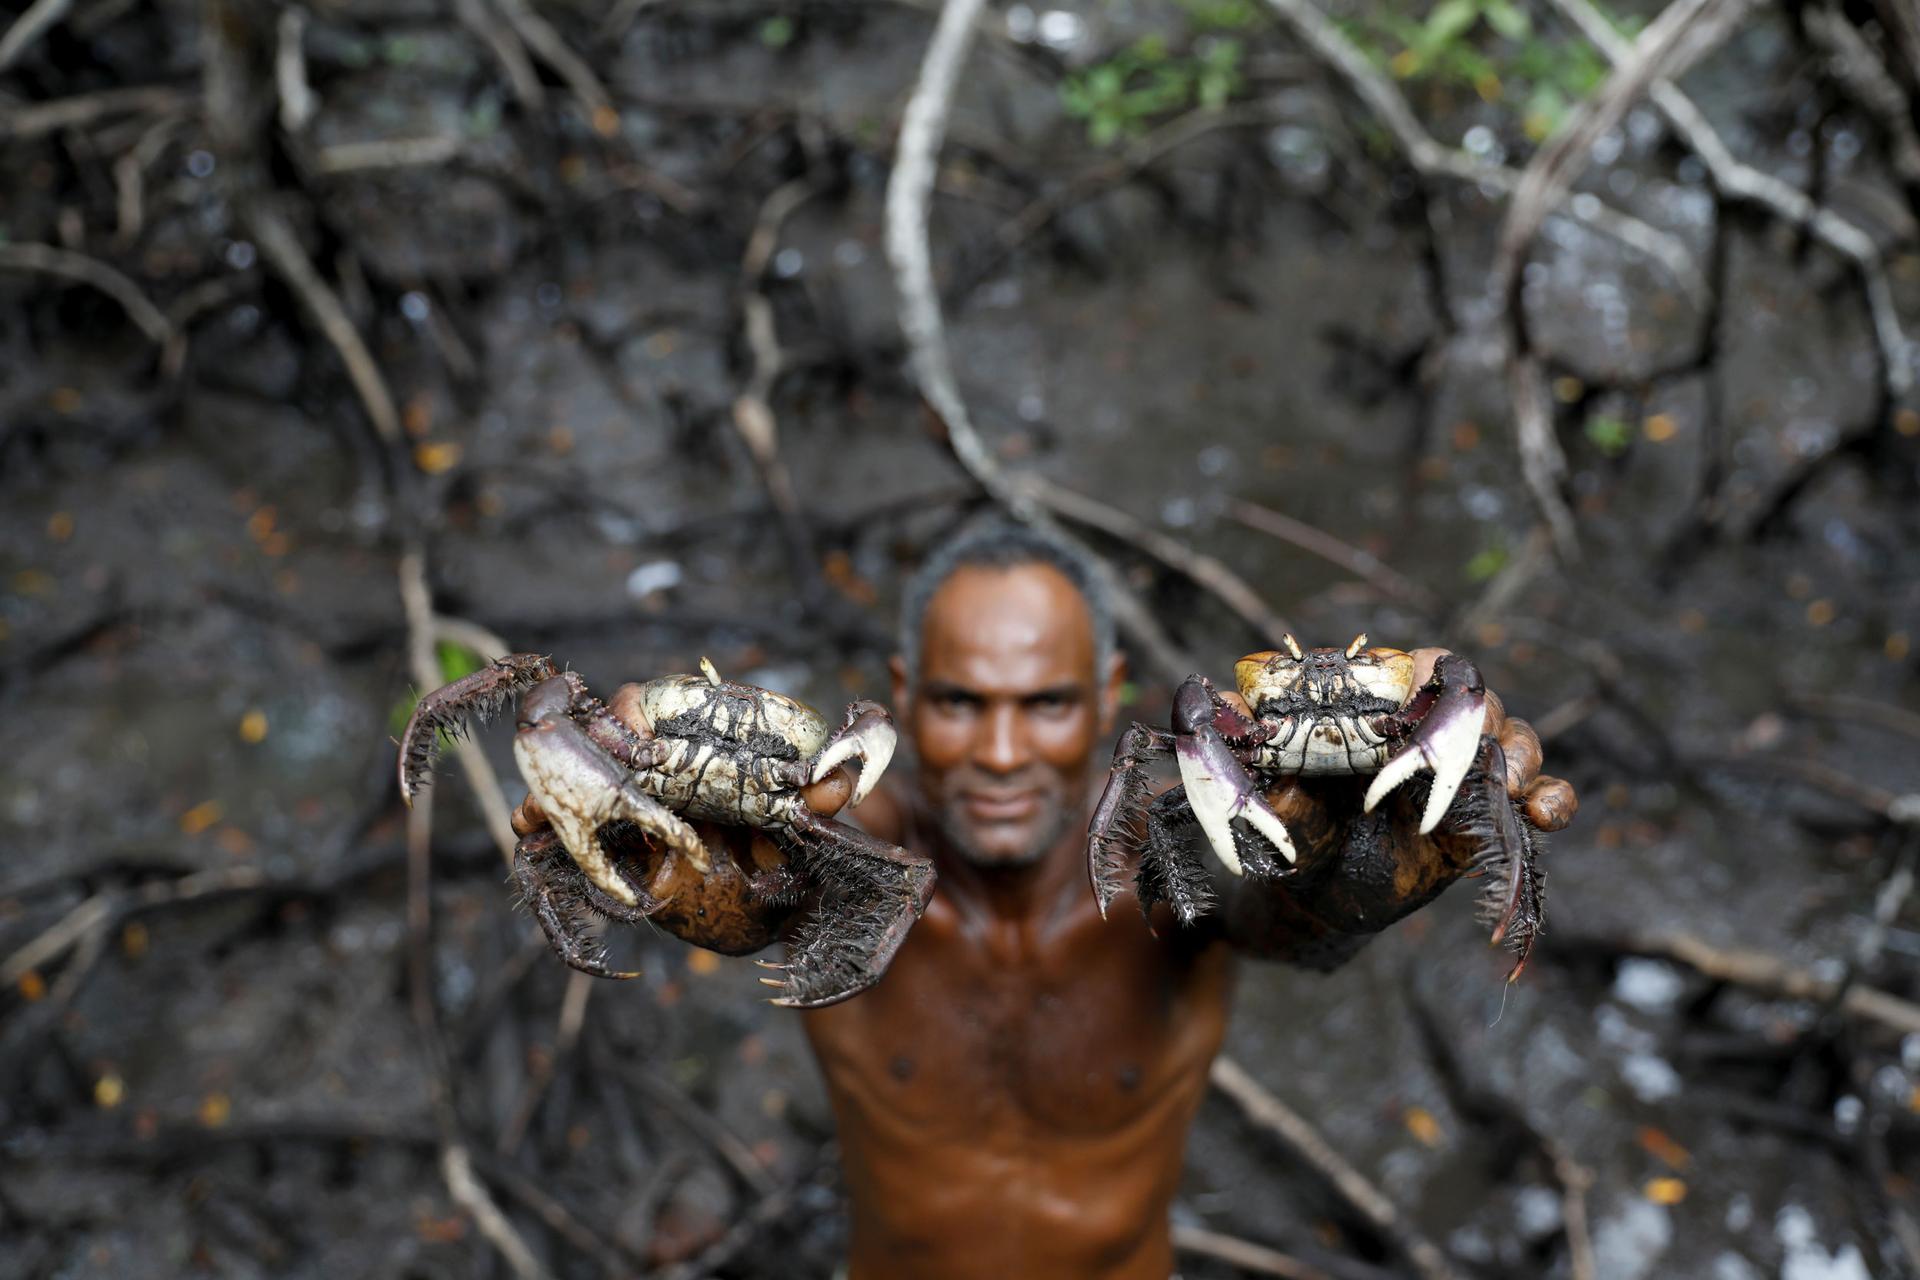 A man is shown without a shirt on holding a crab in each hand above his head.